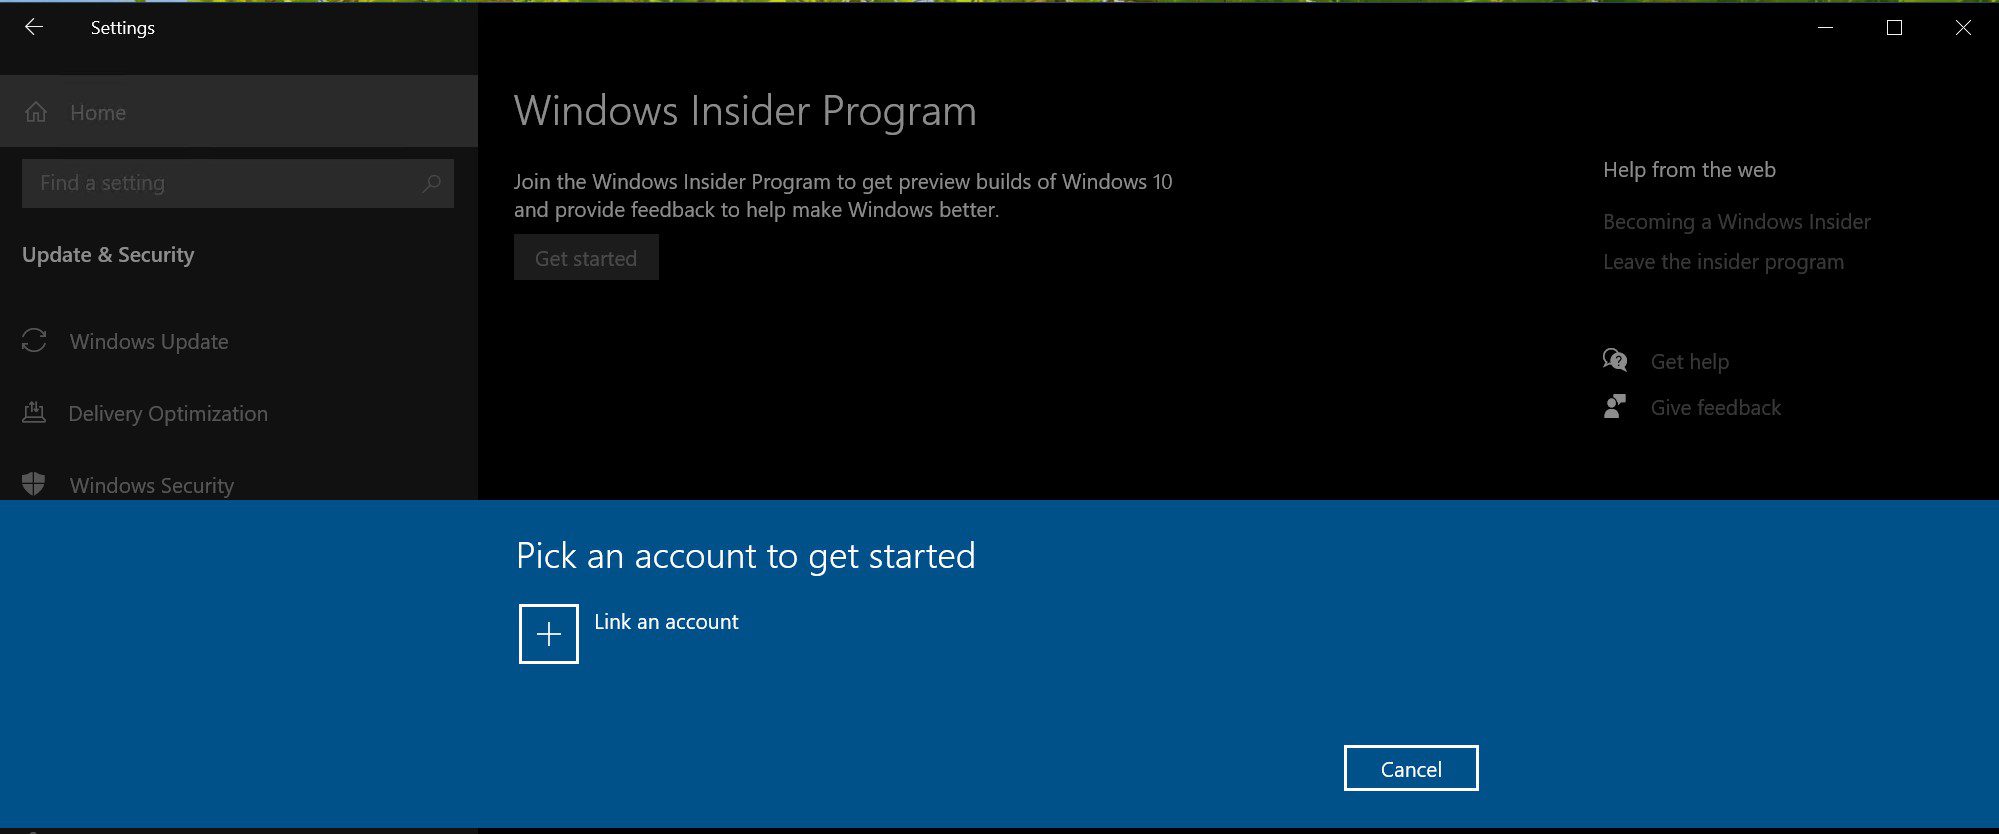 Pick an account to link to the Windows Insider Program